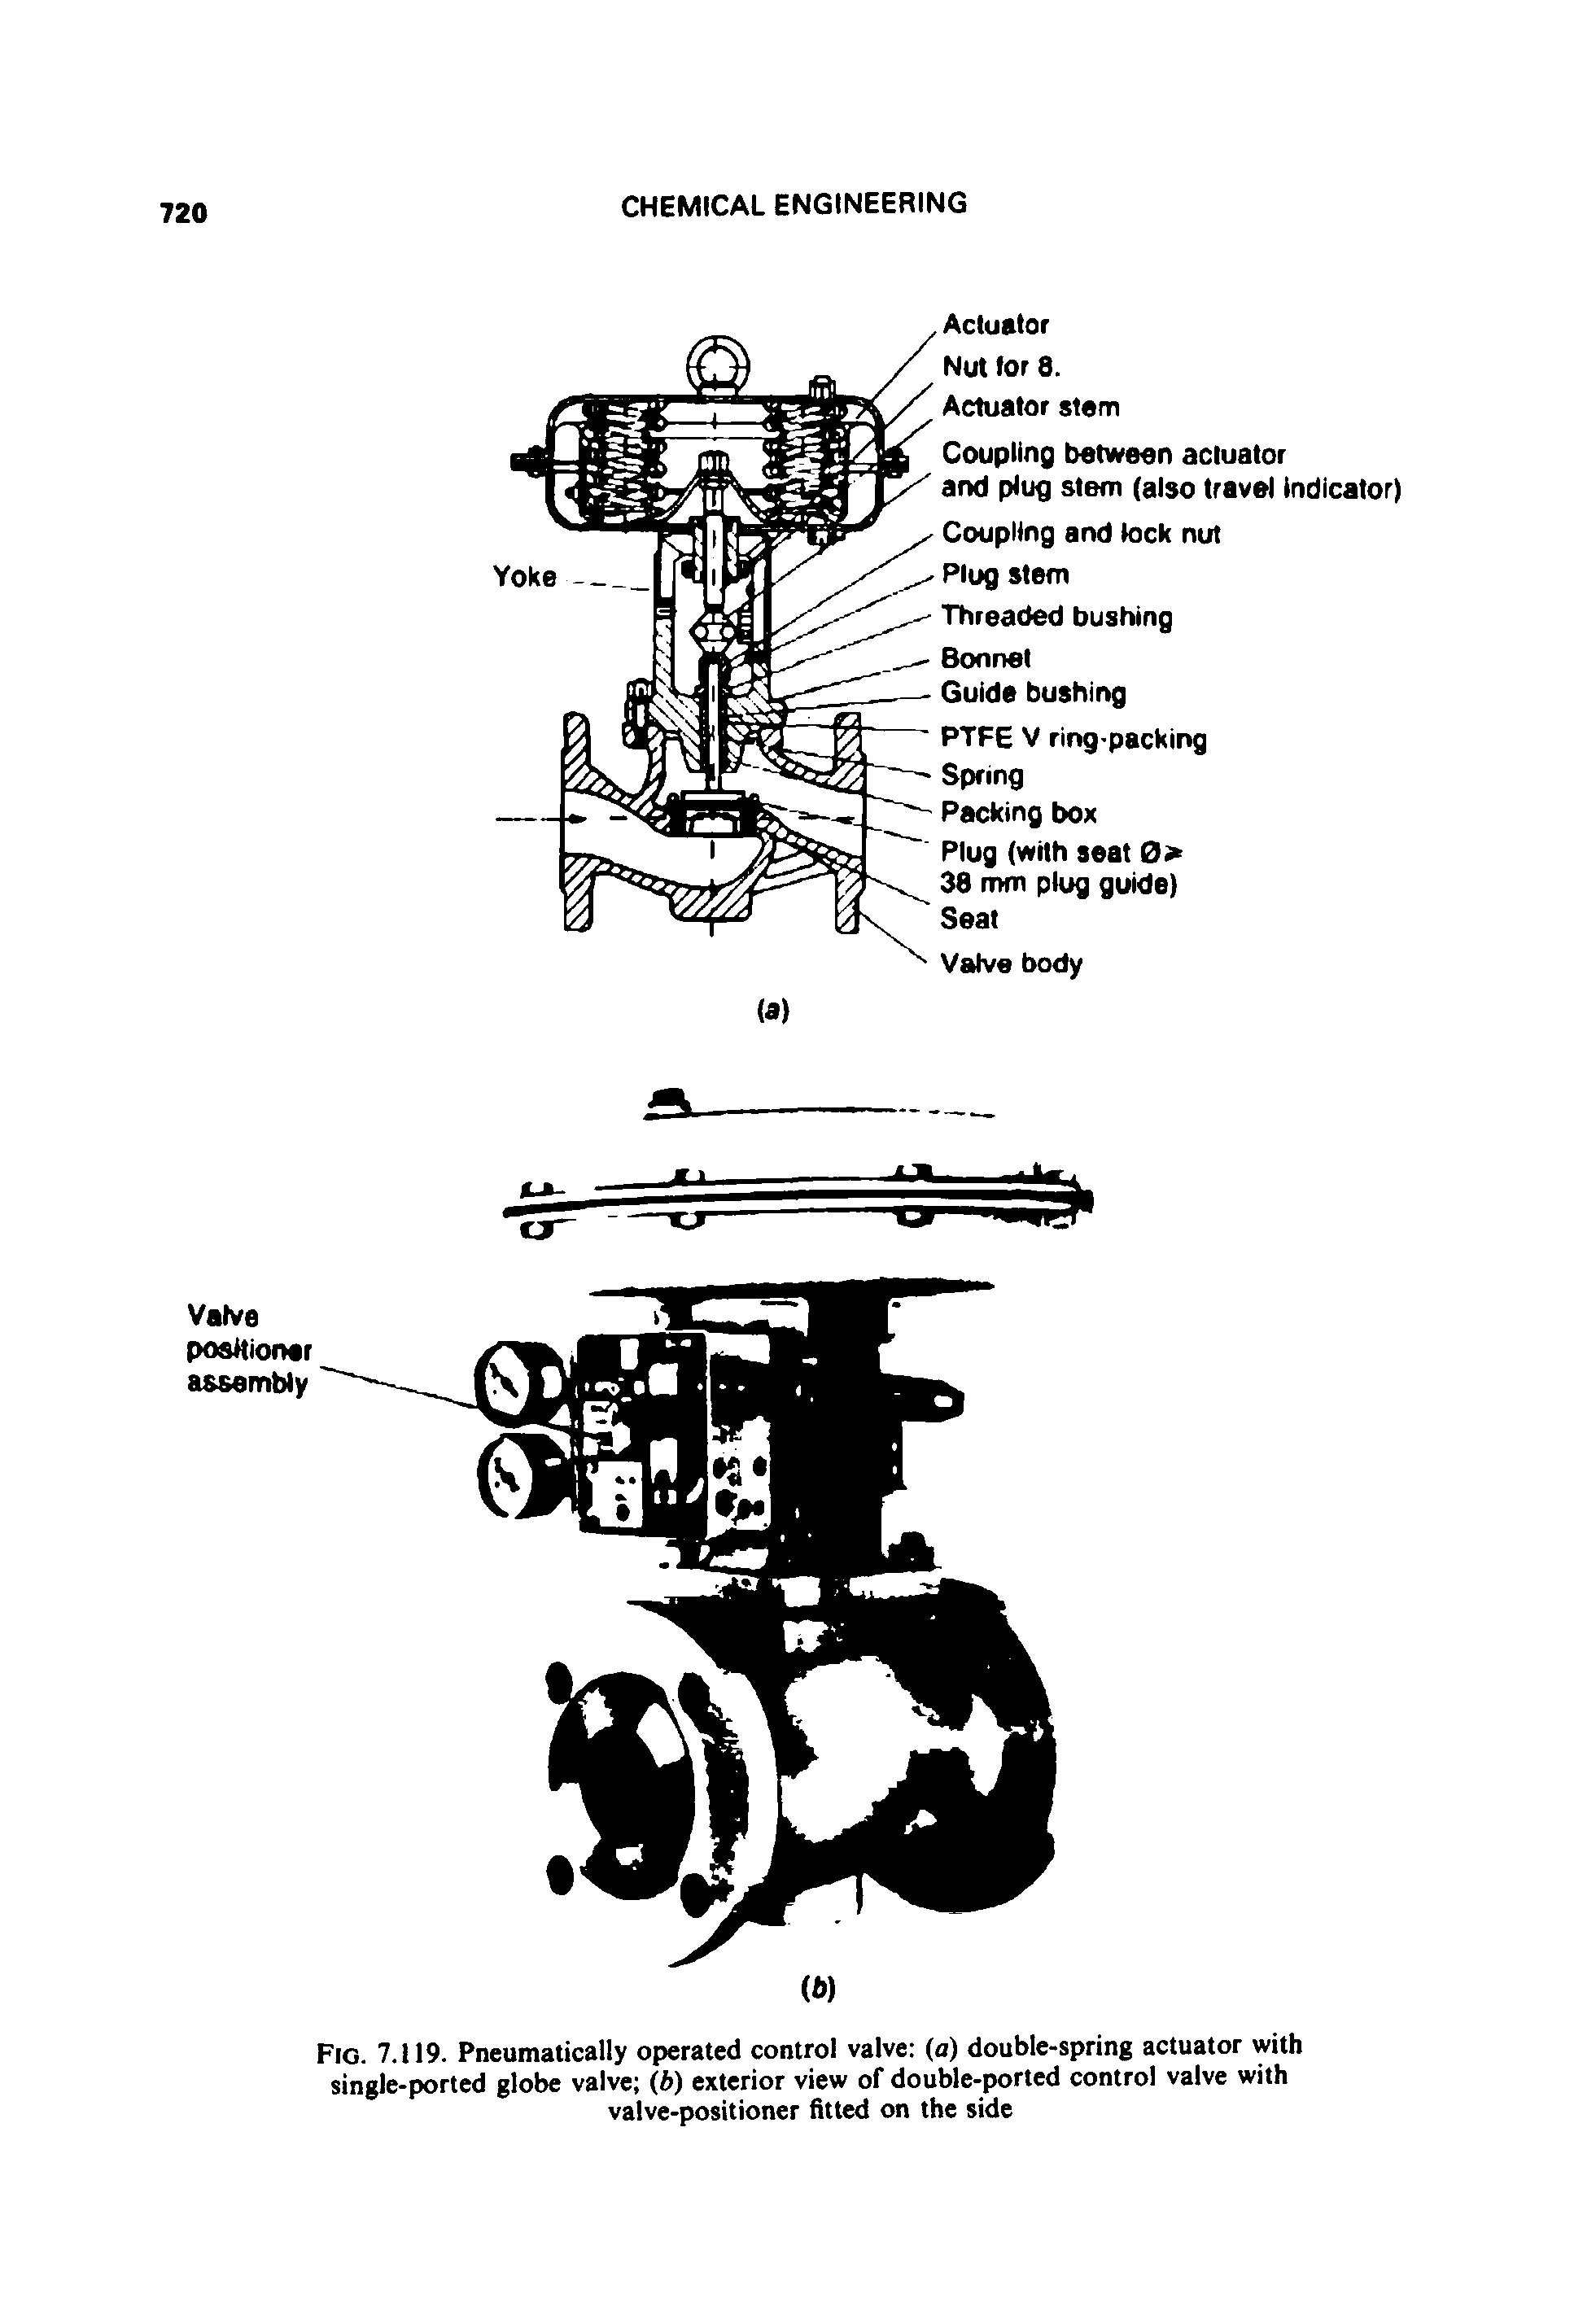 Fig. 7.119. Pneumatically operated control valve (a) double-spring actuator with single-ported globe valve (b) exterior view of double-ported control valve with valve-positioner fitted on the side...